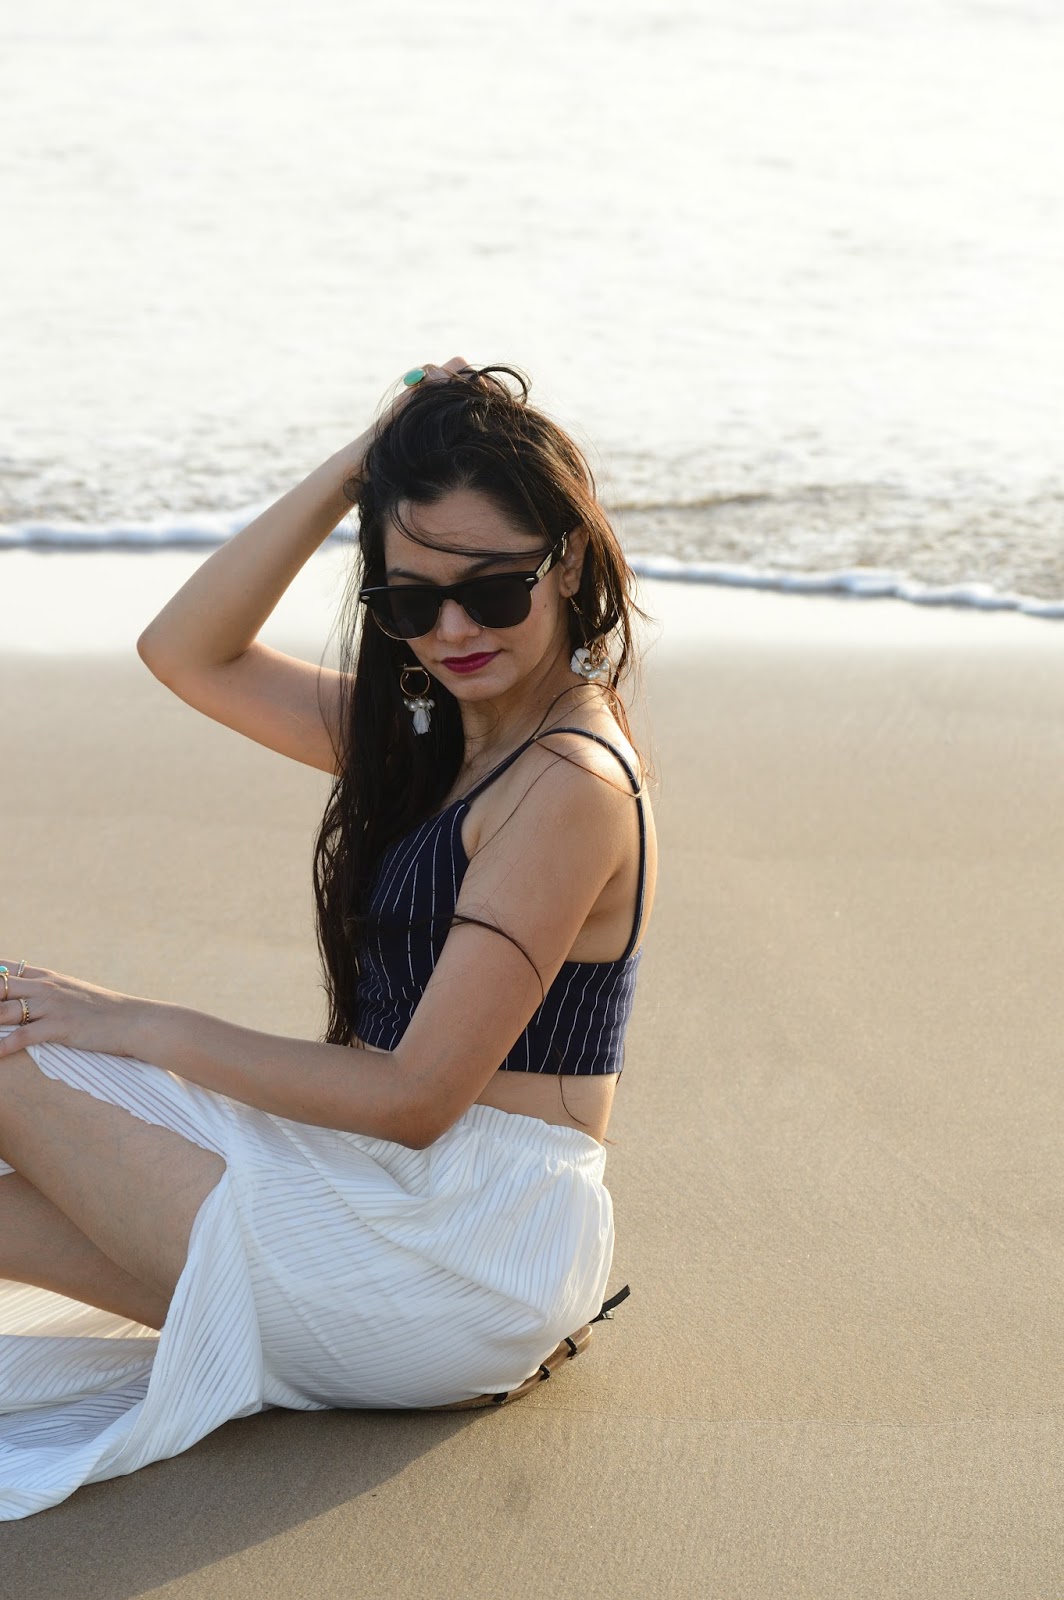 What To Wear To The Beach If You Don't Want To Wear or Have